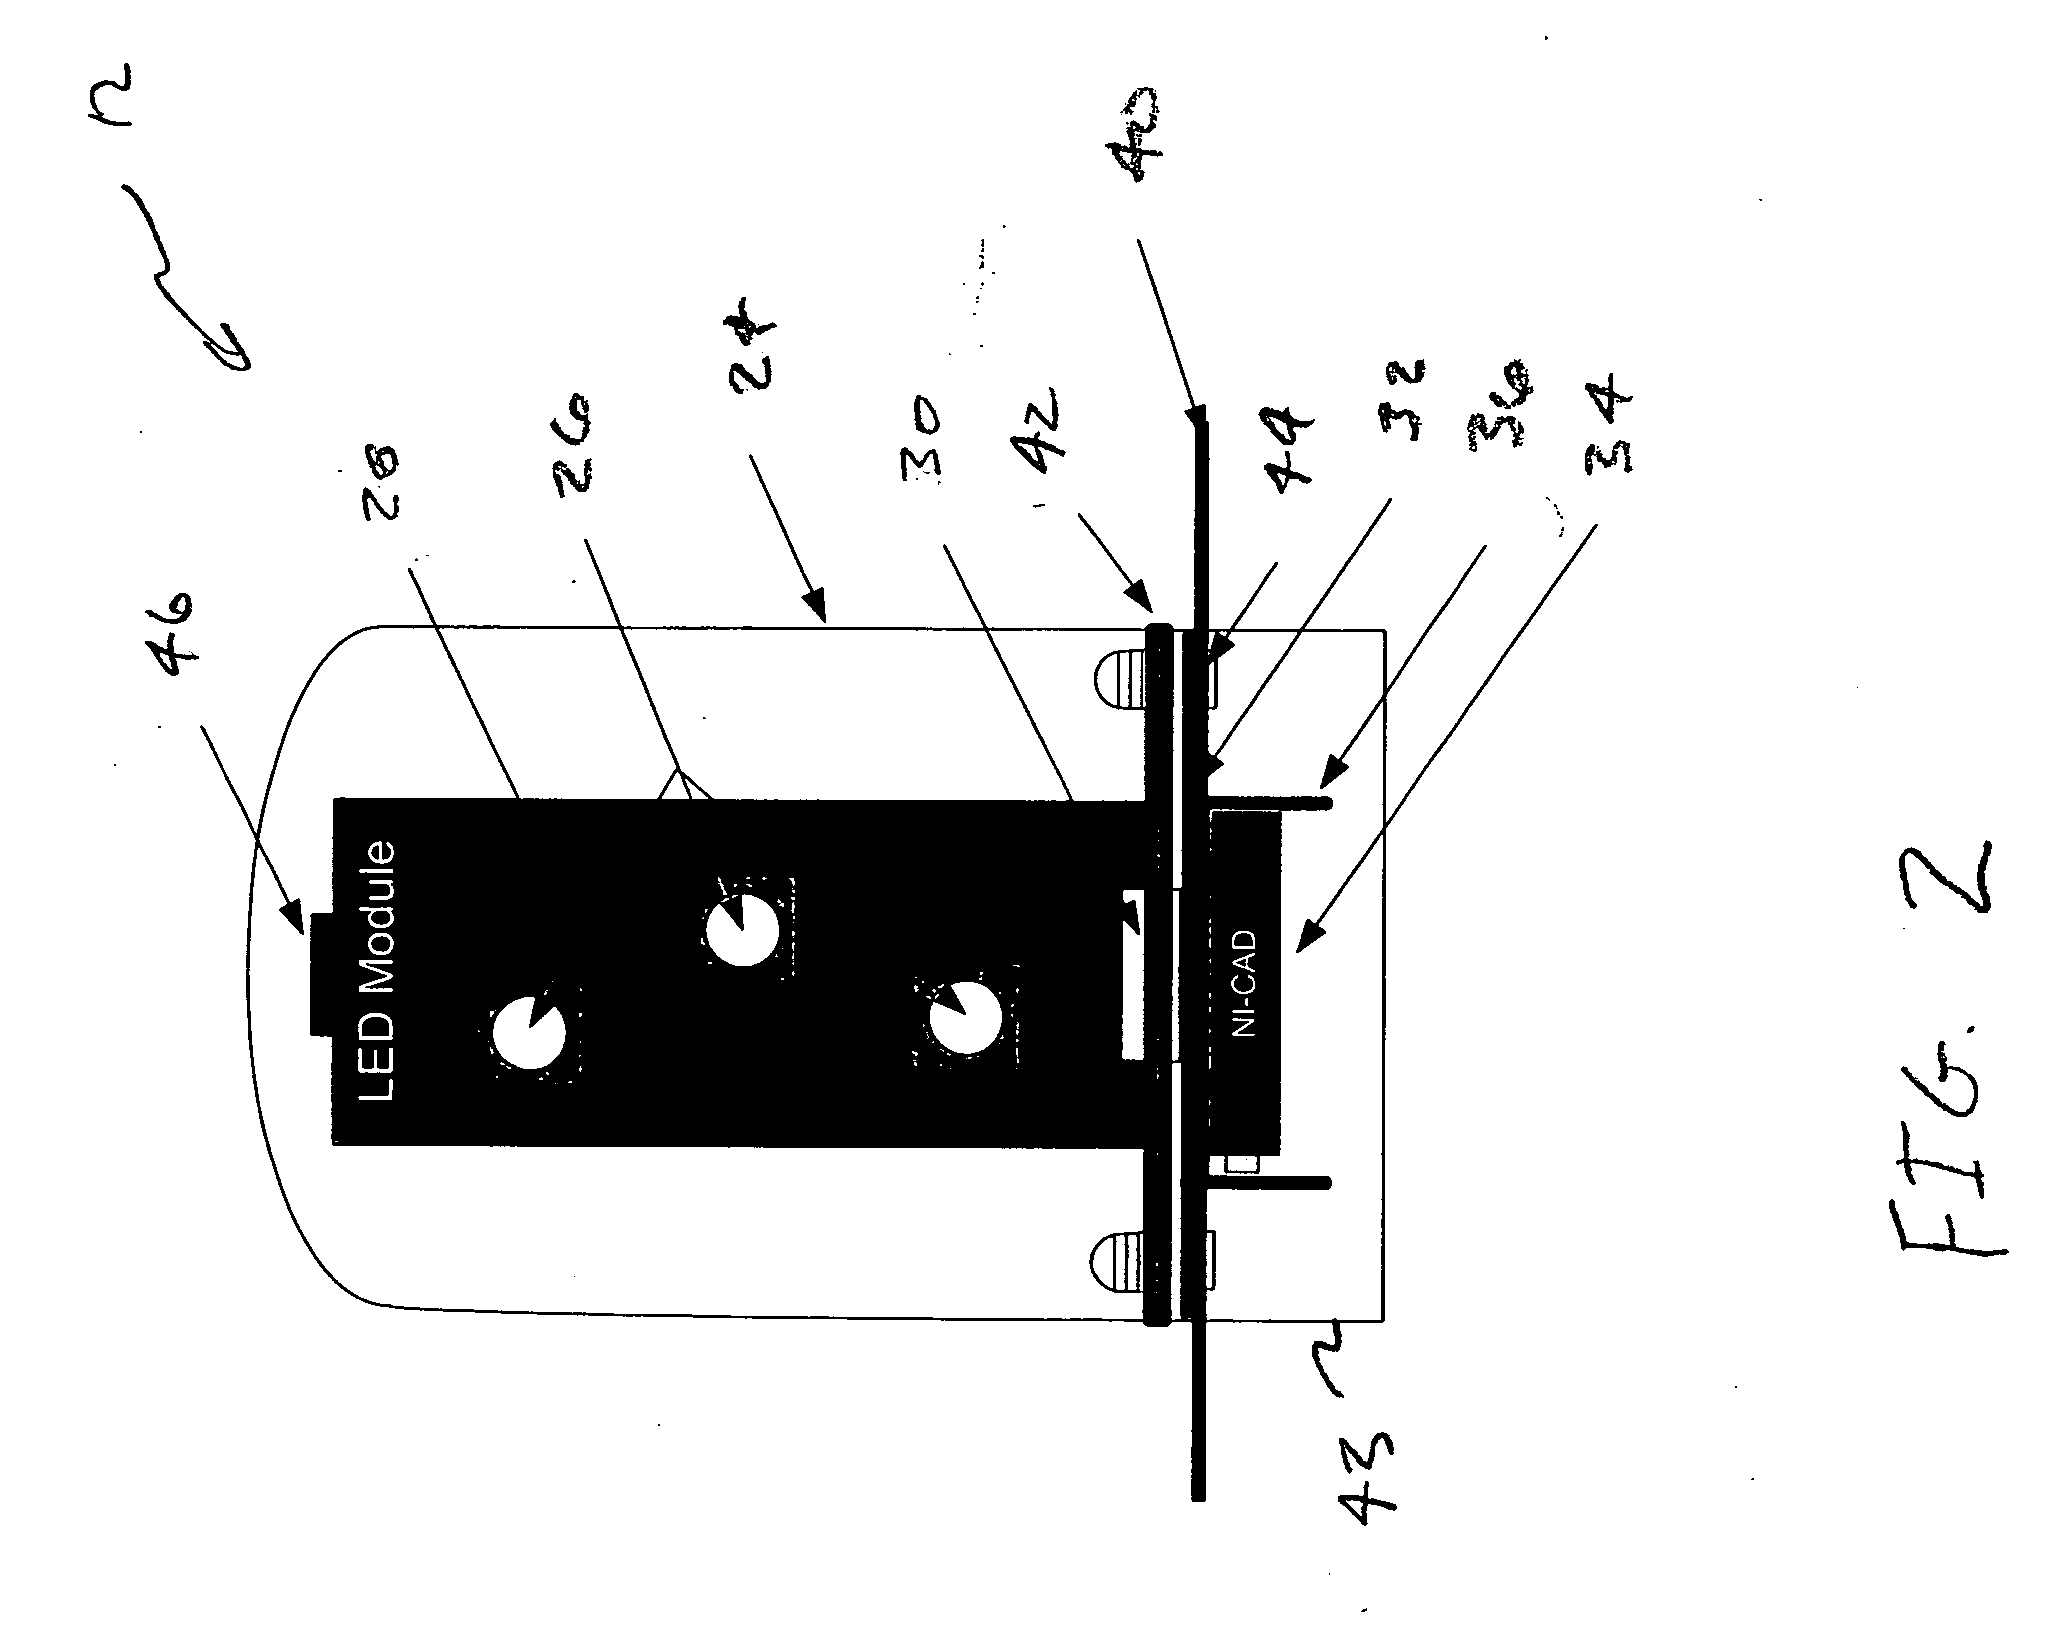 Ambient light sensing solar powered pulsed LED visual indicator apparatus and method